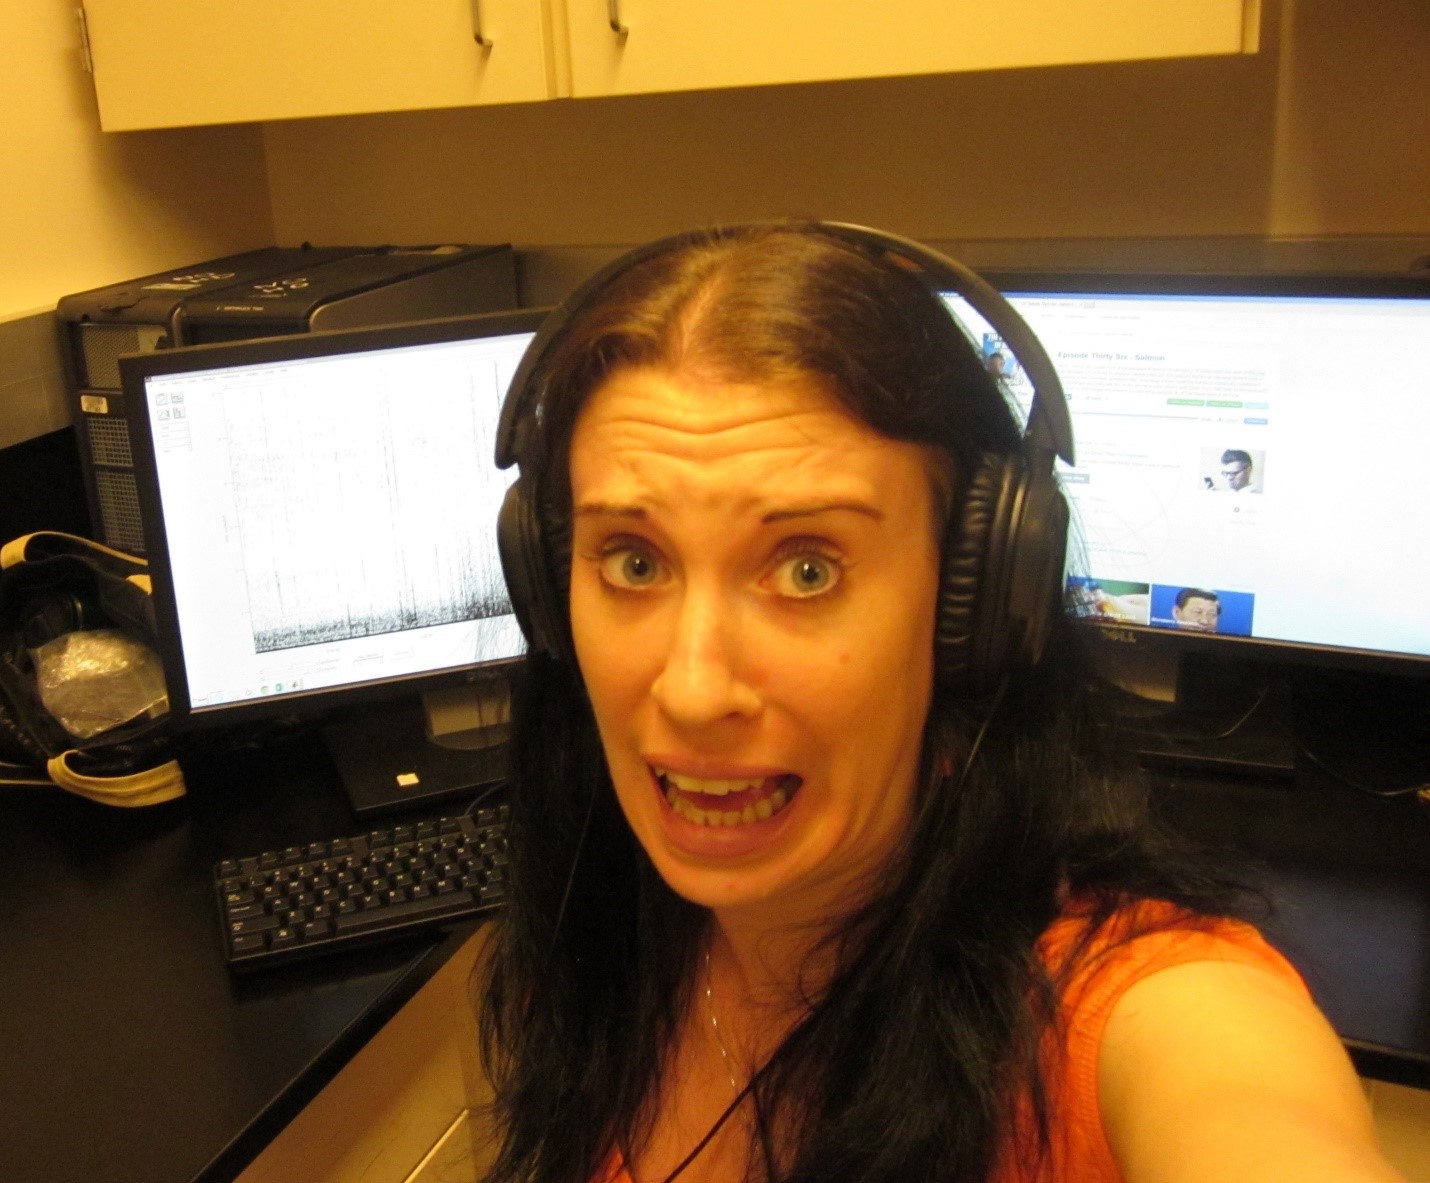 A girl wearing headphones and sitting in front of two monitors with a distressed expression on her face.